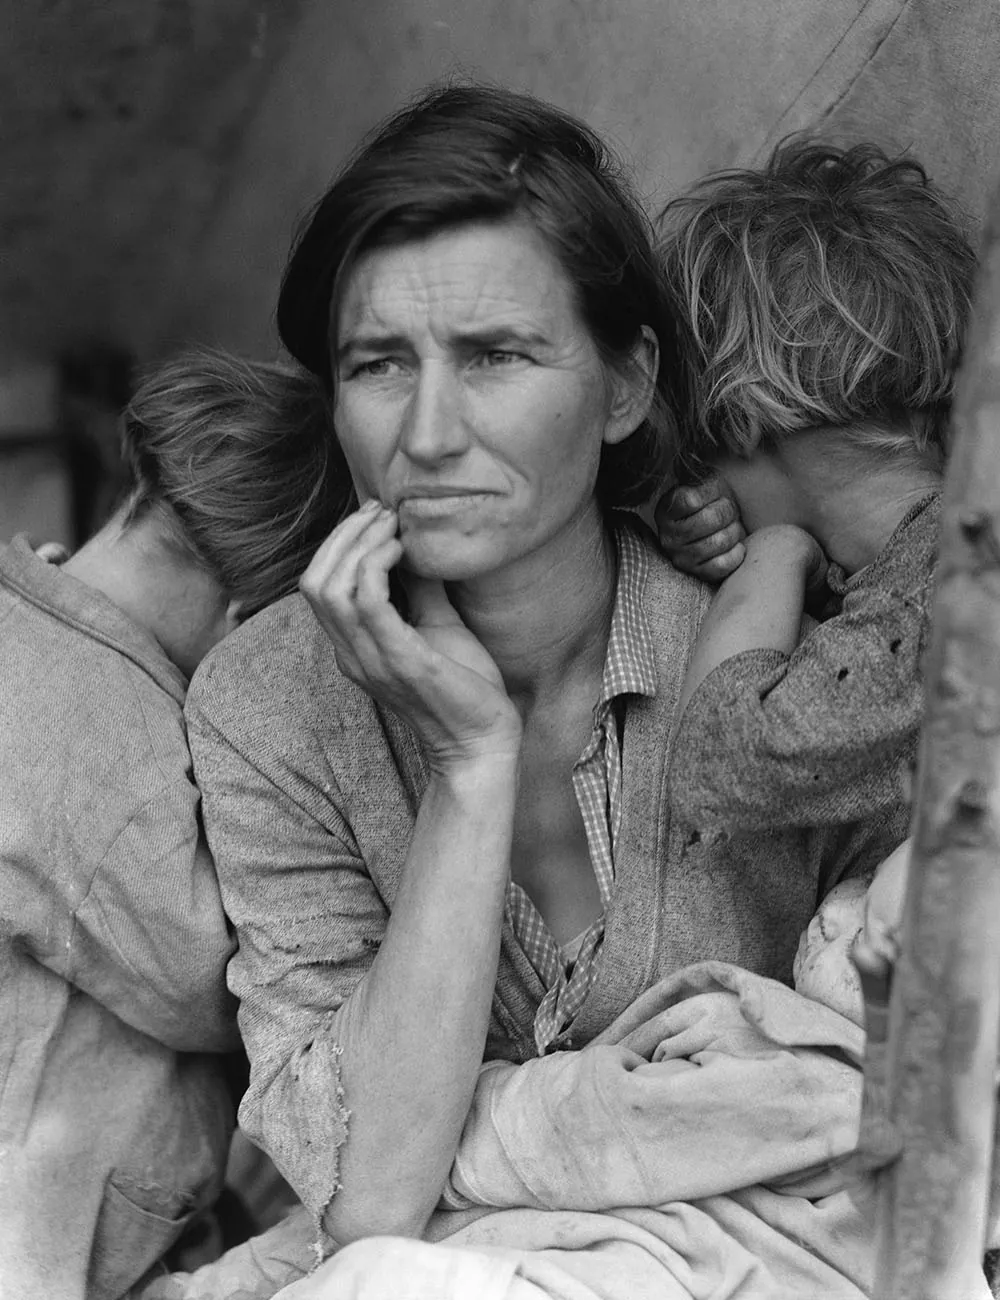 A black and white photo shows a desperate-looking woman sitting with two children who bury their faces against her shoulders.